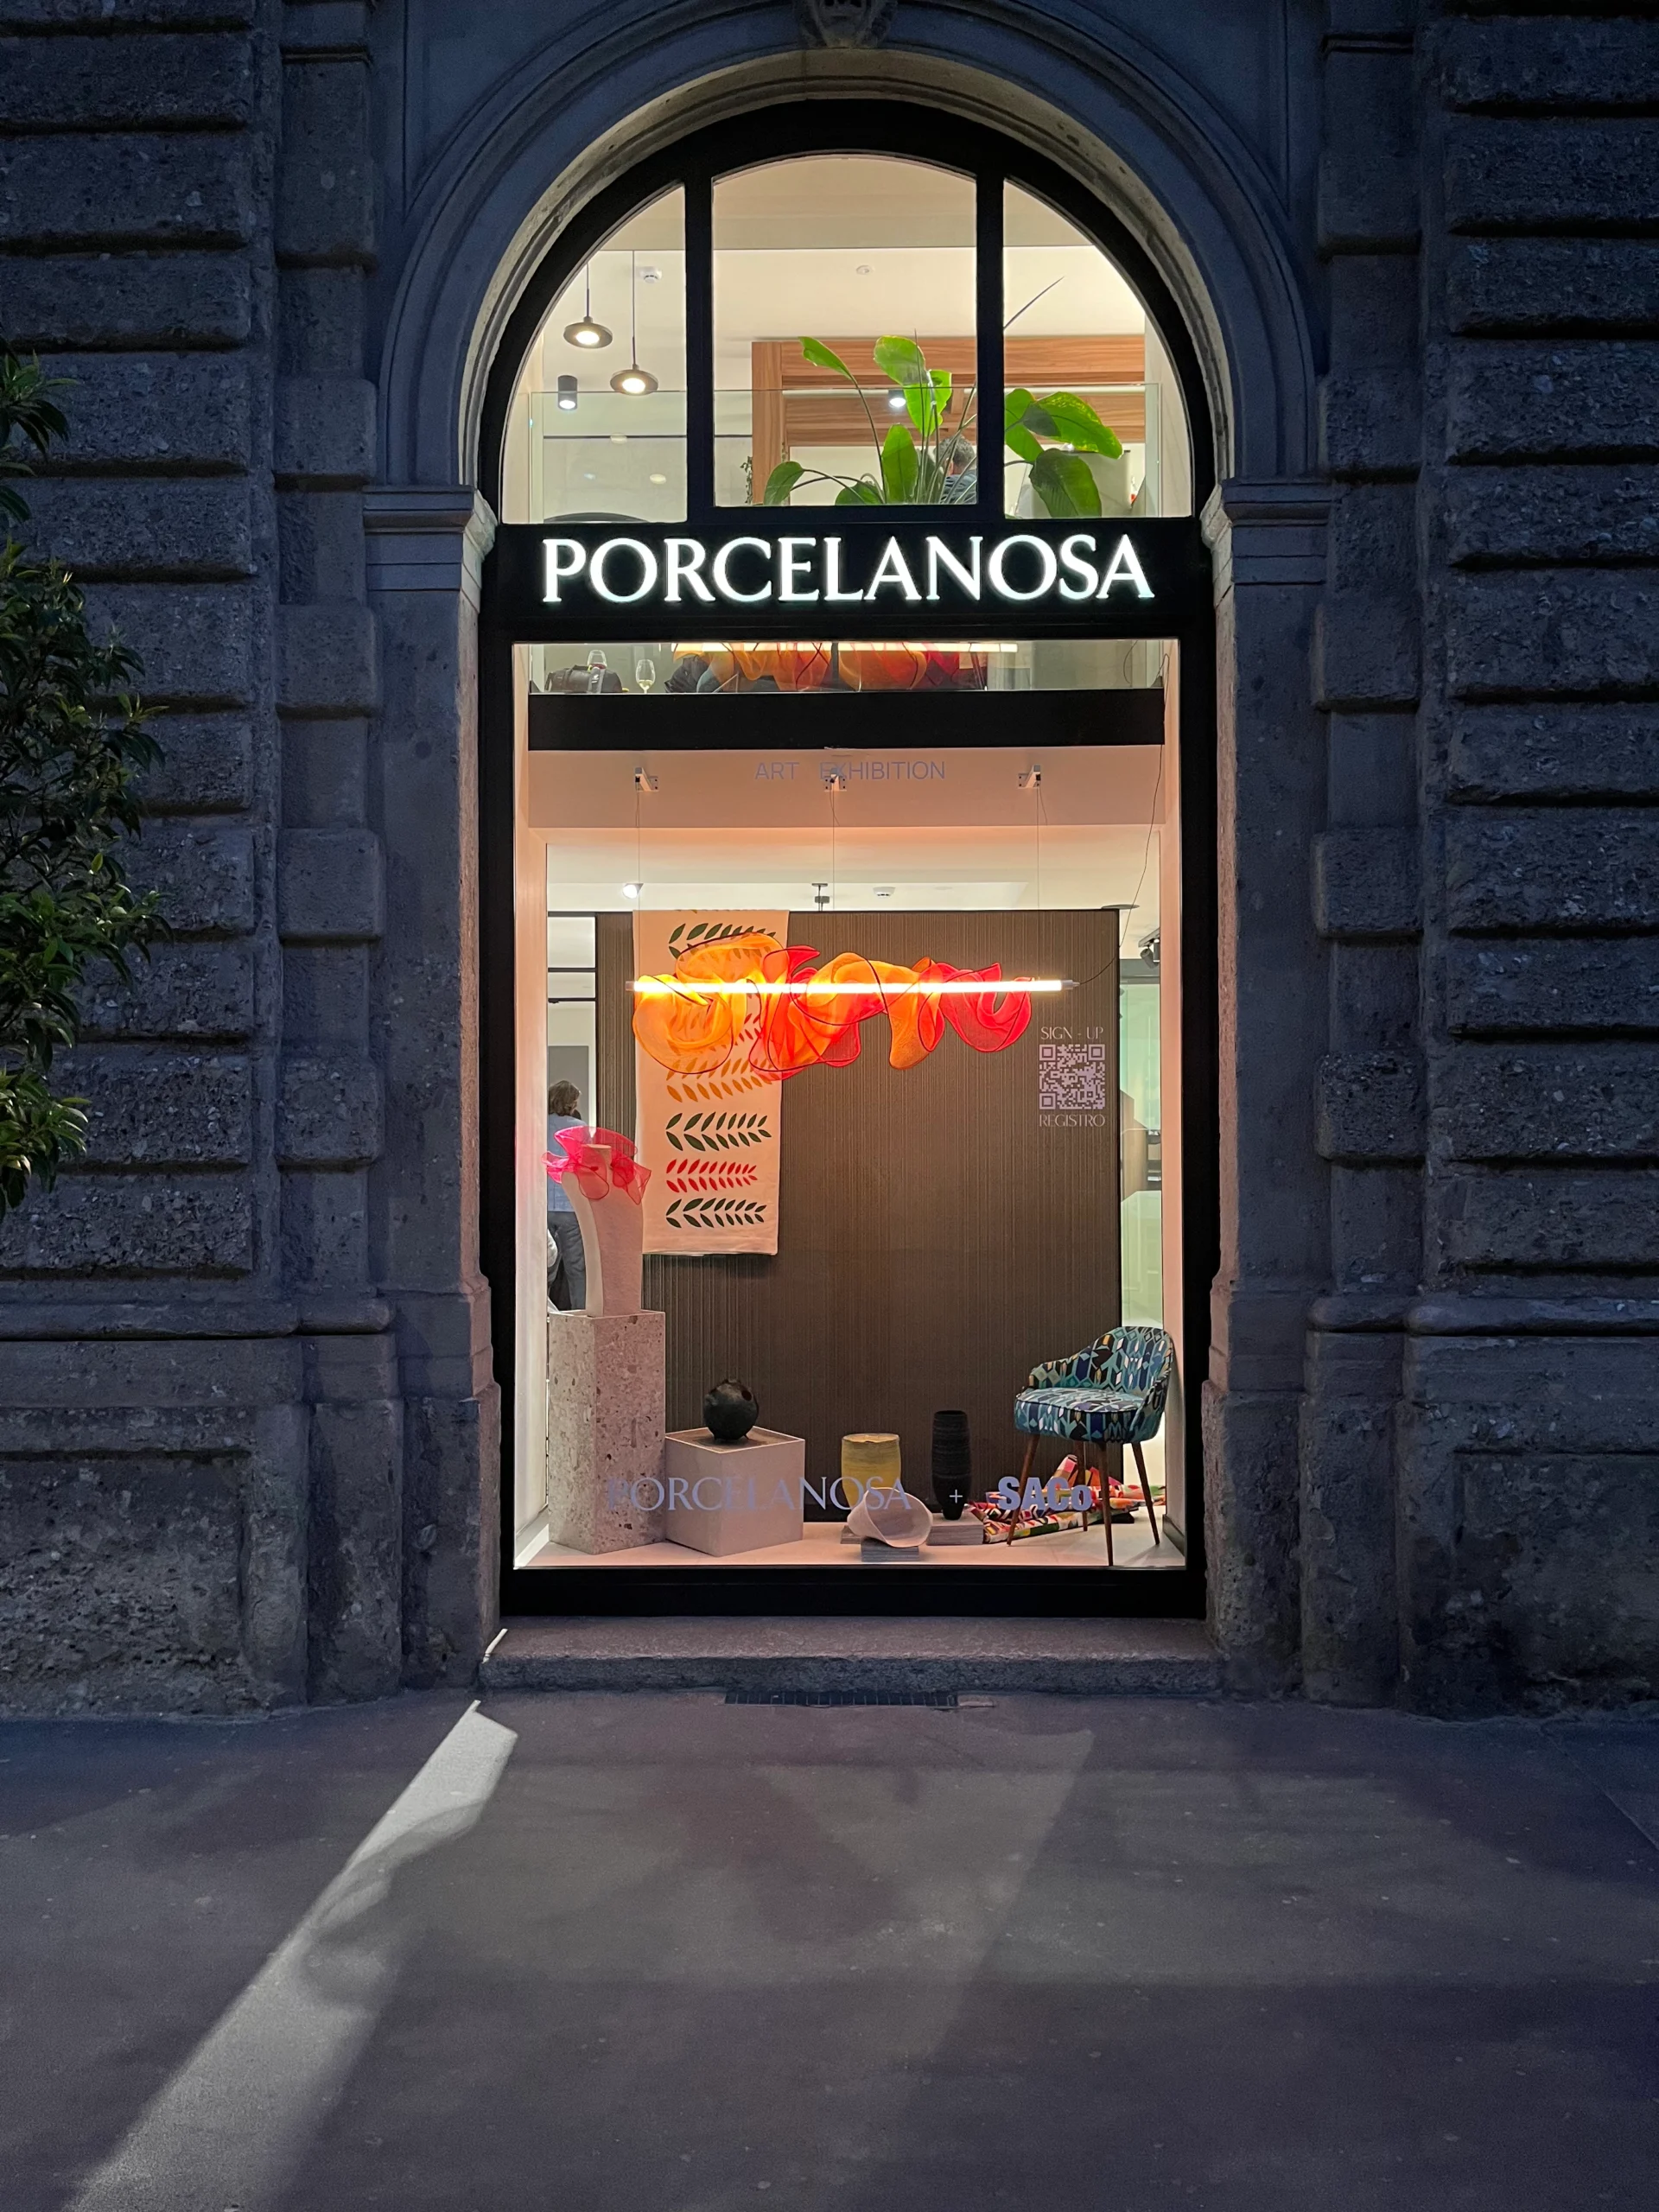 The photo frames a display case in the Porcelanosa shop where the "Cloud" lamp by LZF Lamps can be seen together with other designs by collaborators of the exhibition. 